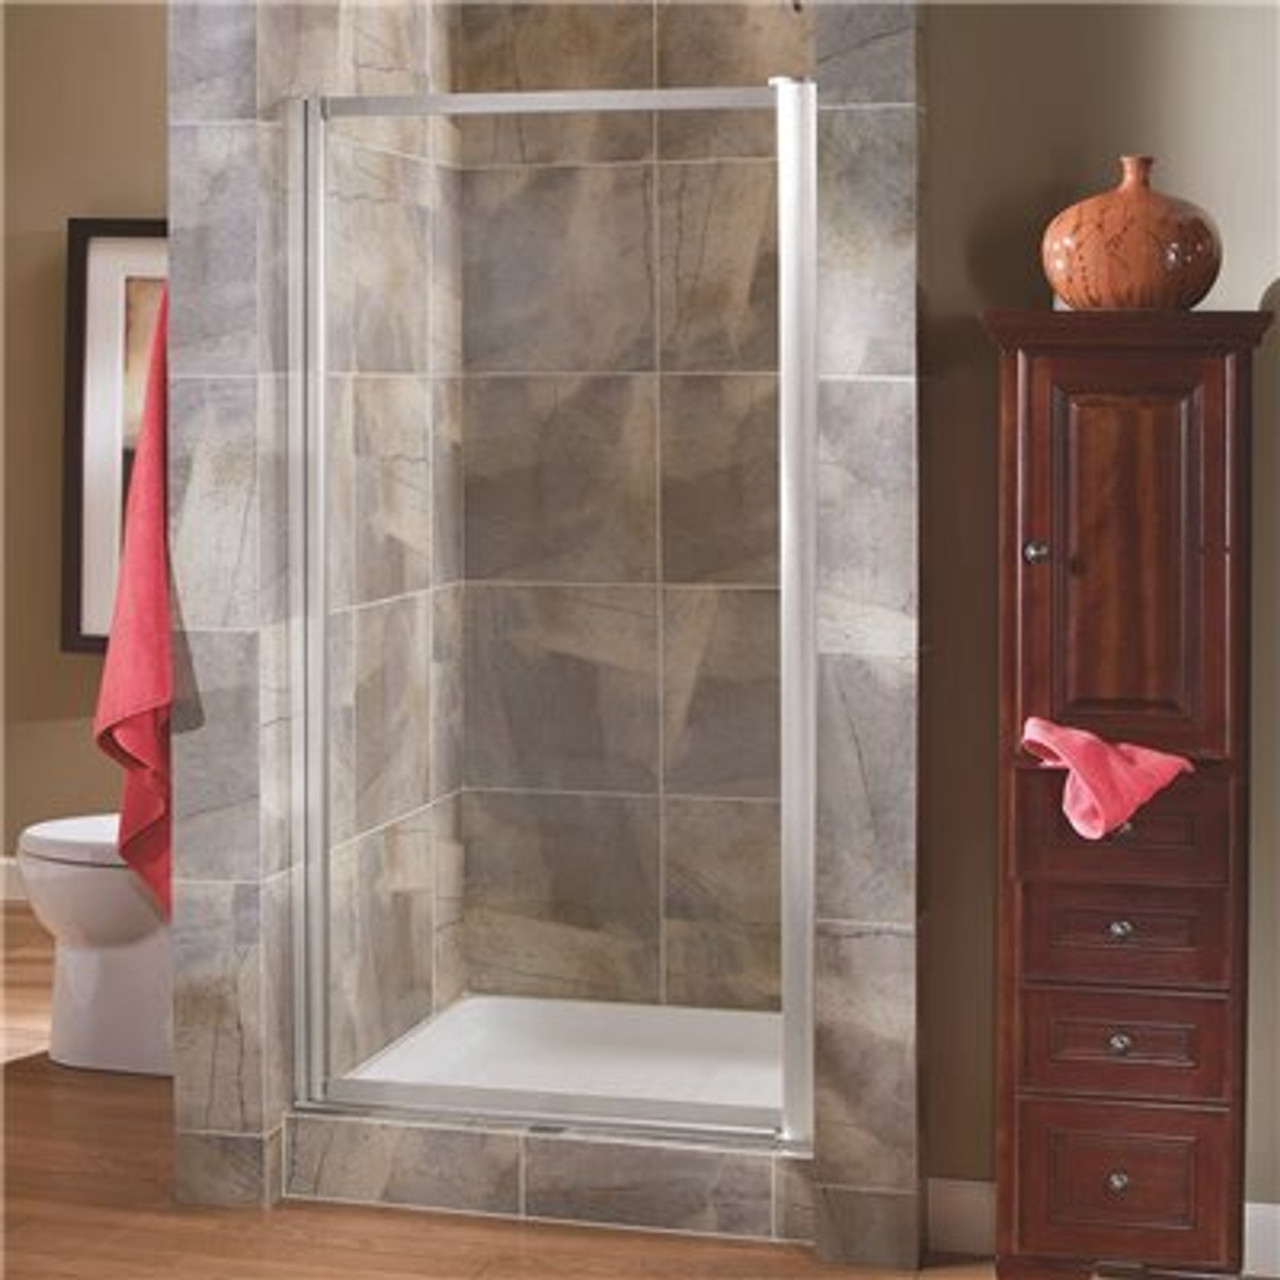 Foremost Tides 33 In. To 35 In. X 65 In. Framed Pivot Shower Door In Silver With Clear Glass With Handle